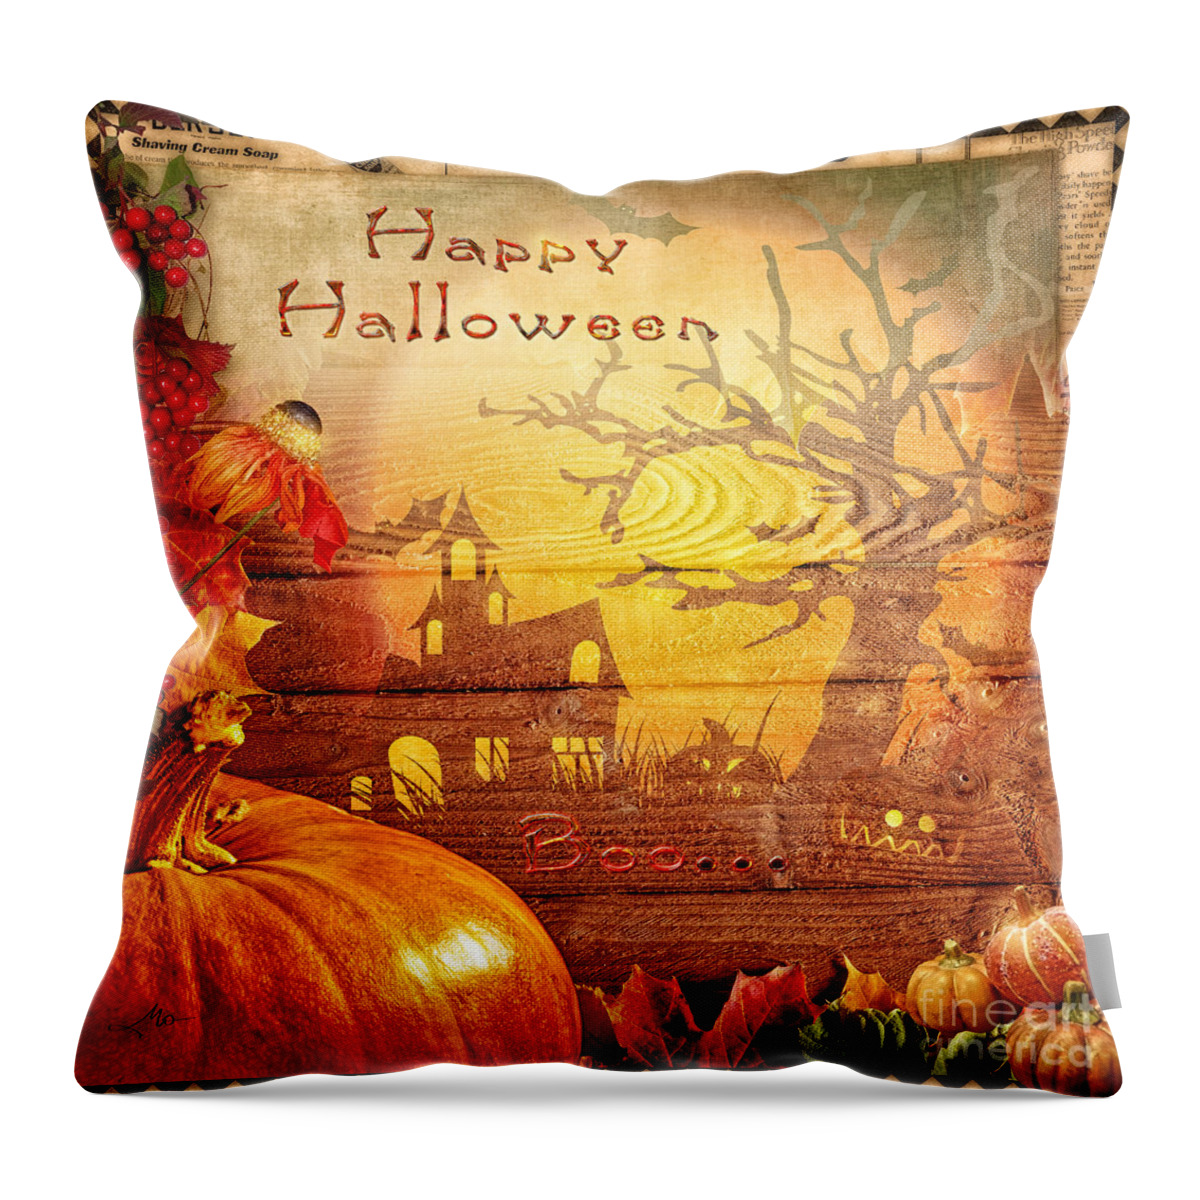 Boo Throw Pillow featuring the digital art Boo by Mo T